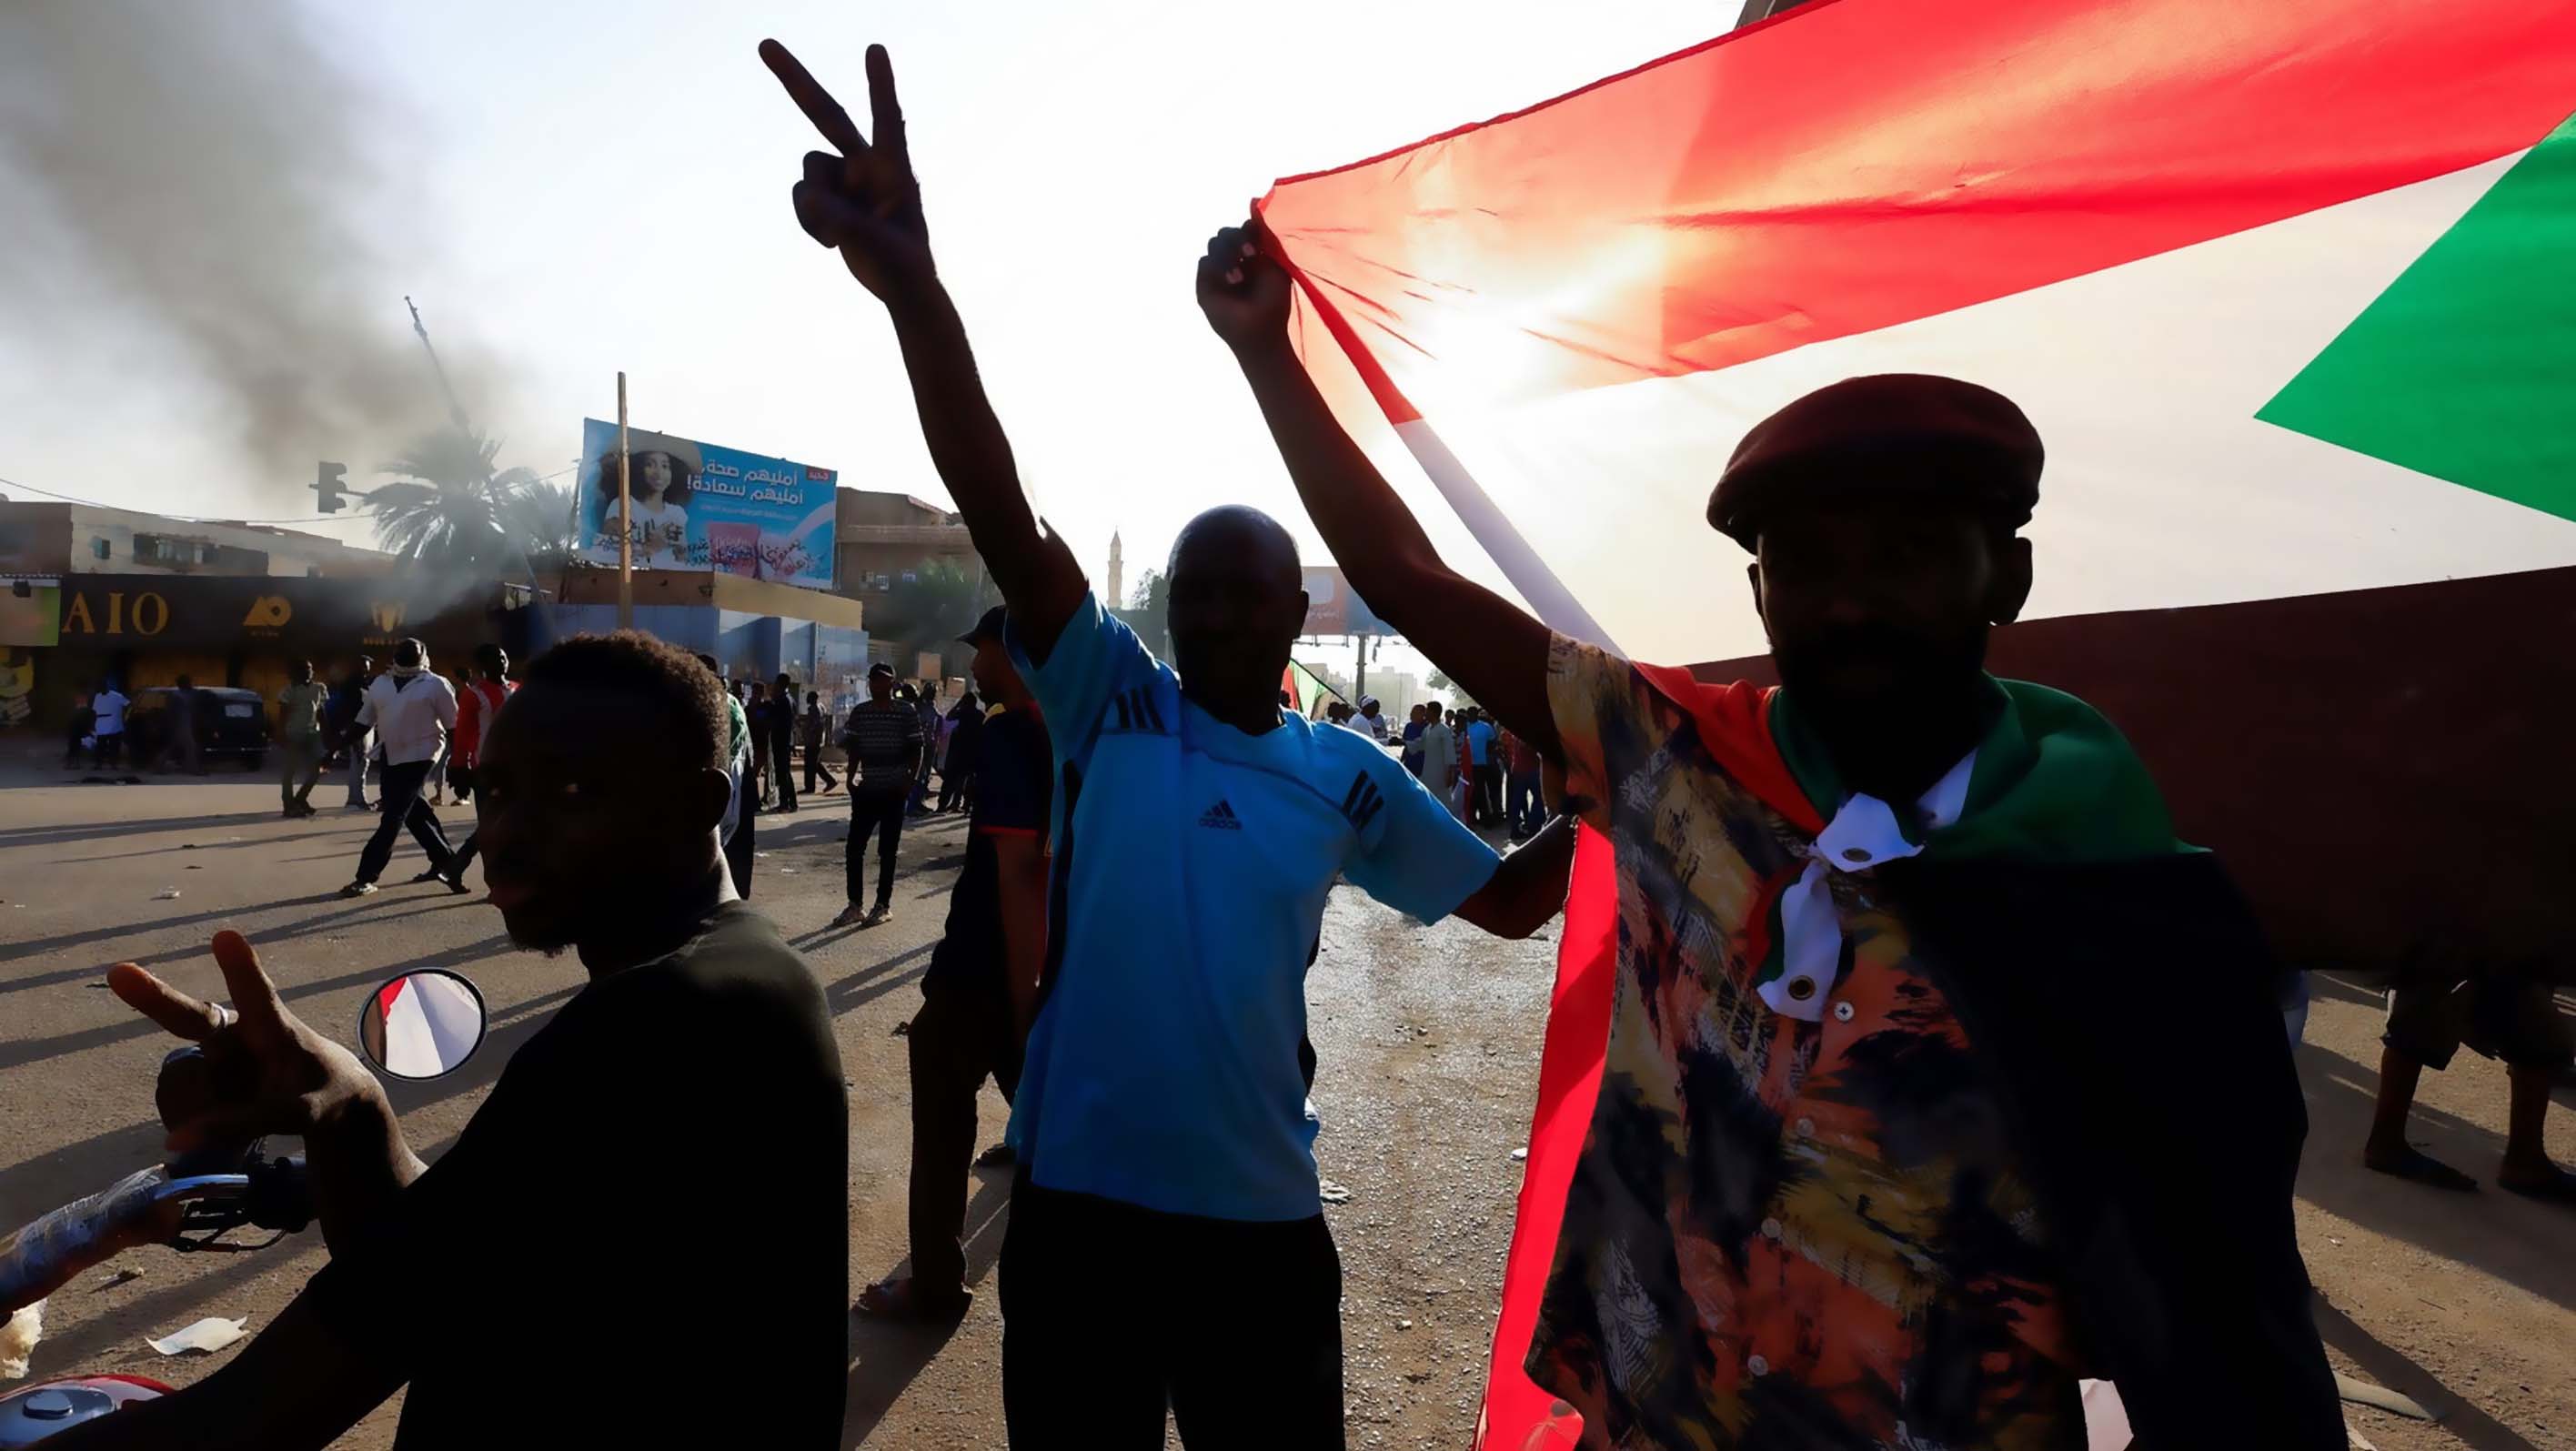 Karman stands with Sudanese people amidst Khartoum conflict